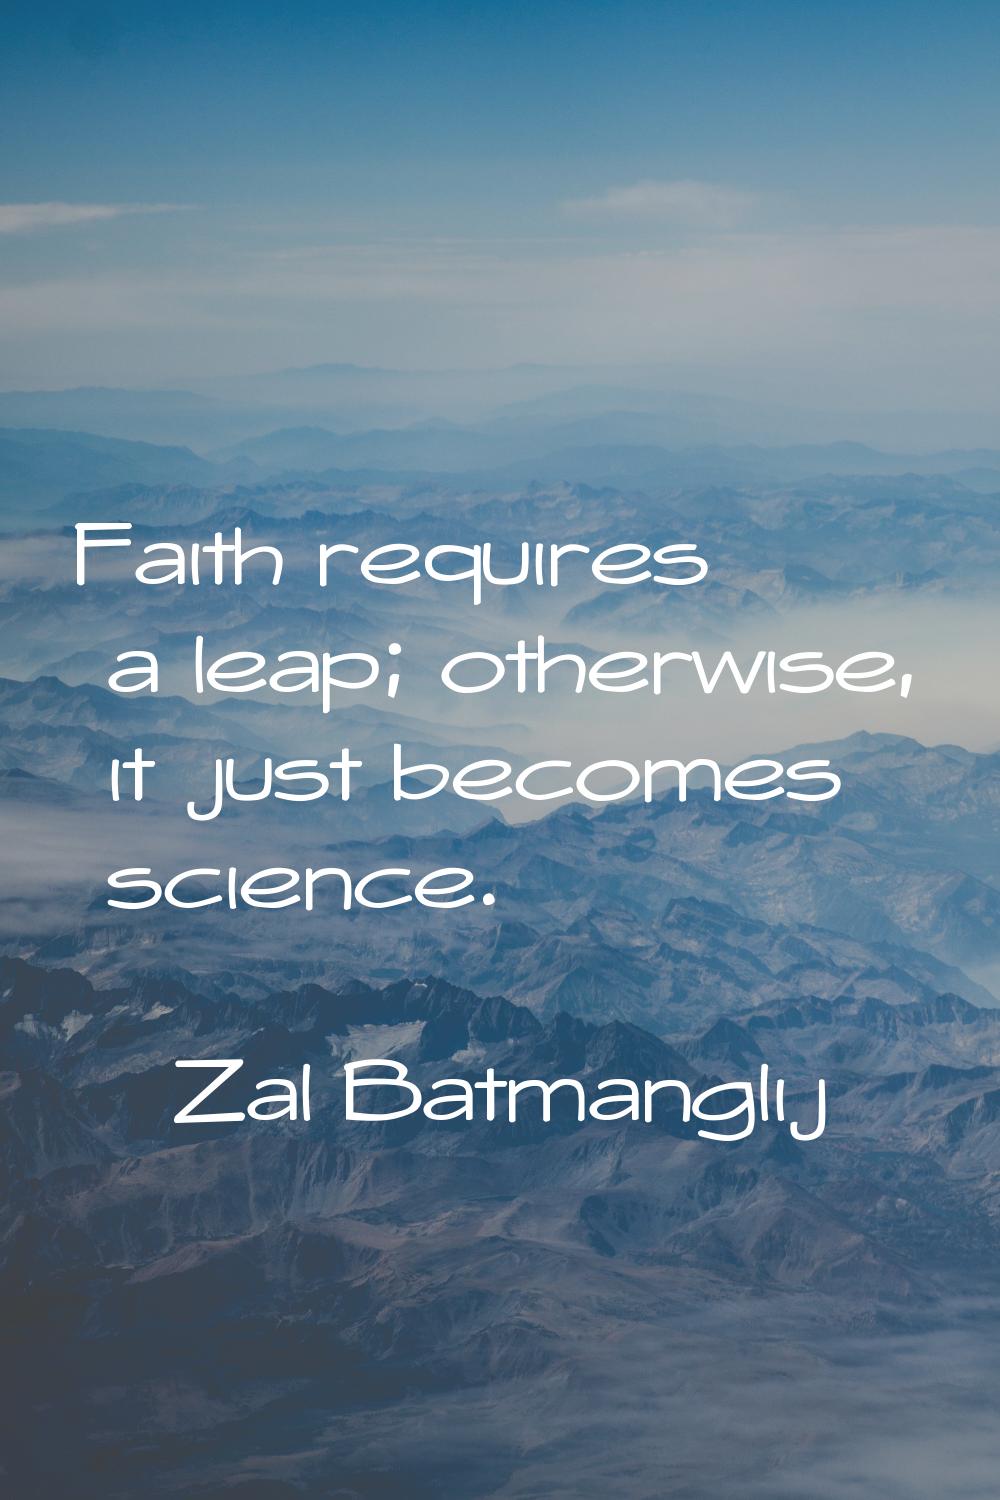 Faith requires a leap; otherwise, it just becomes science.